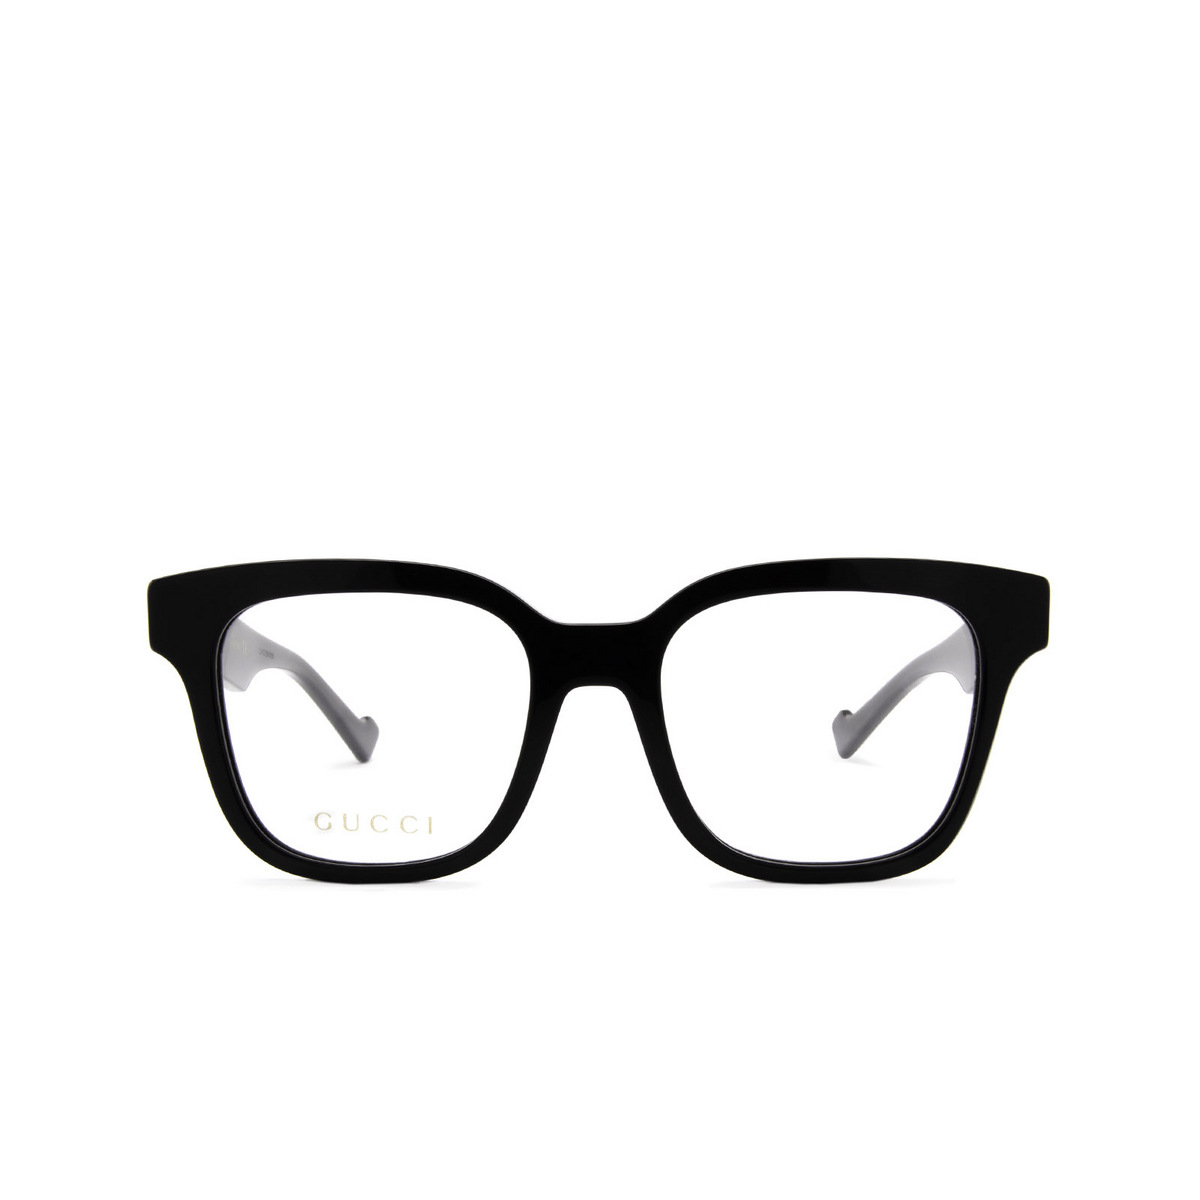 Gucci® Square Eyeglasses: GG0958O color Black 001 - front view.